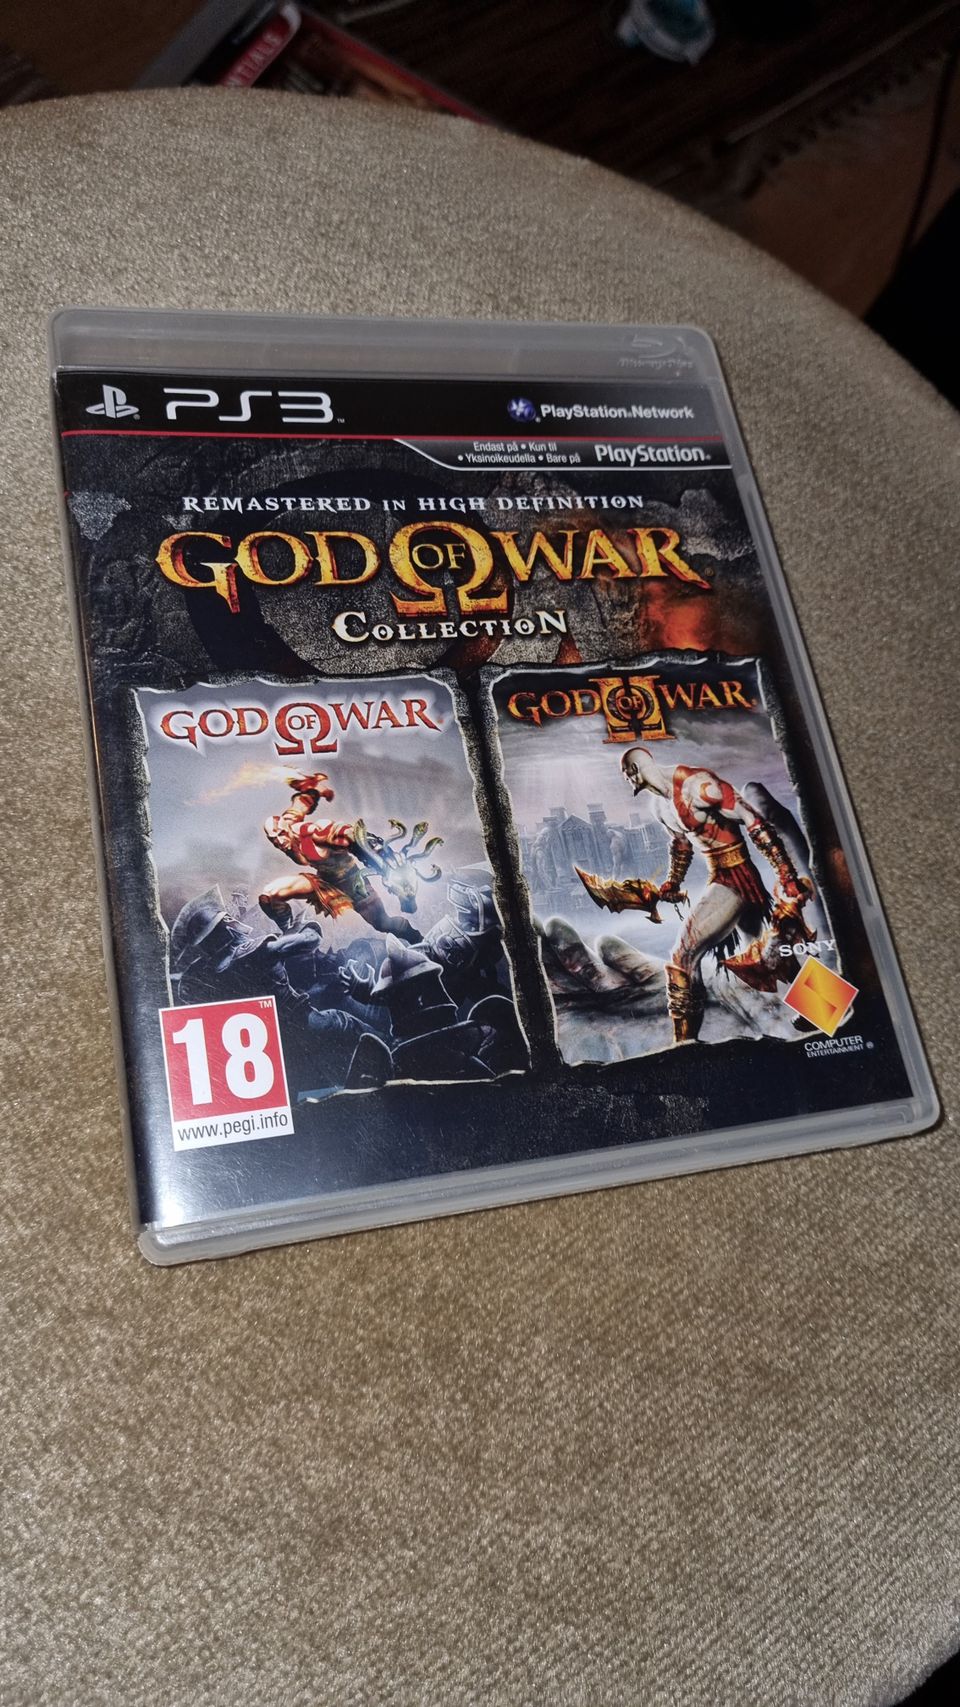 PS3/Playstation 3: God of war Collection